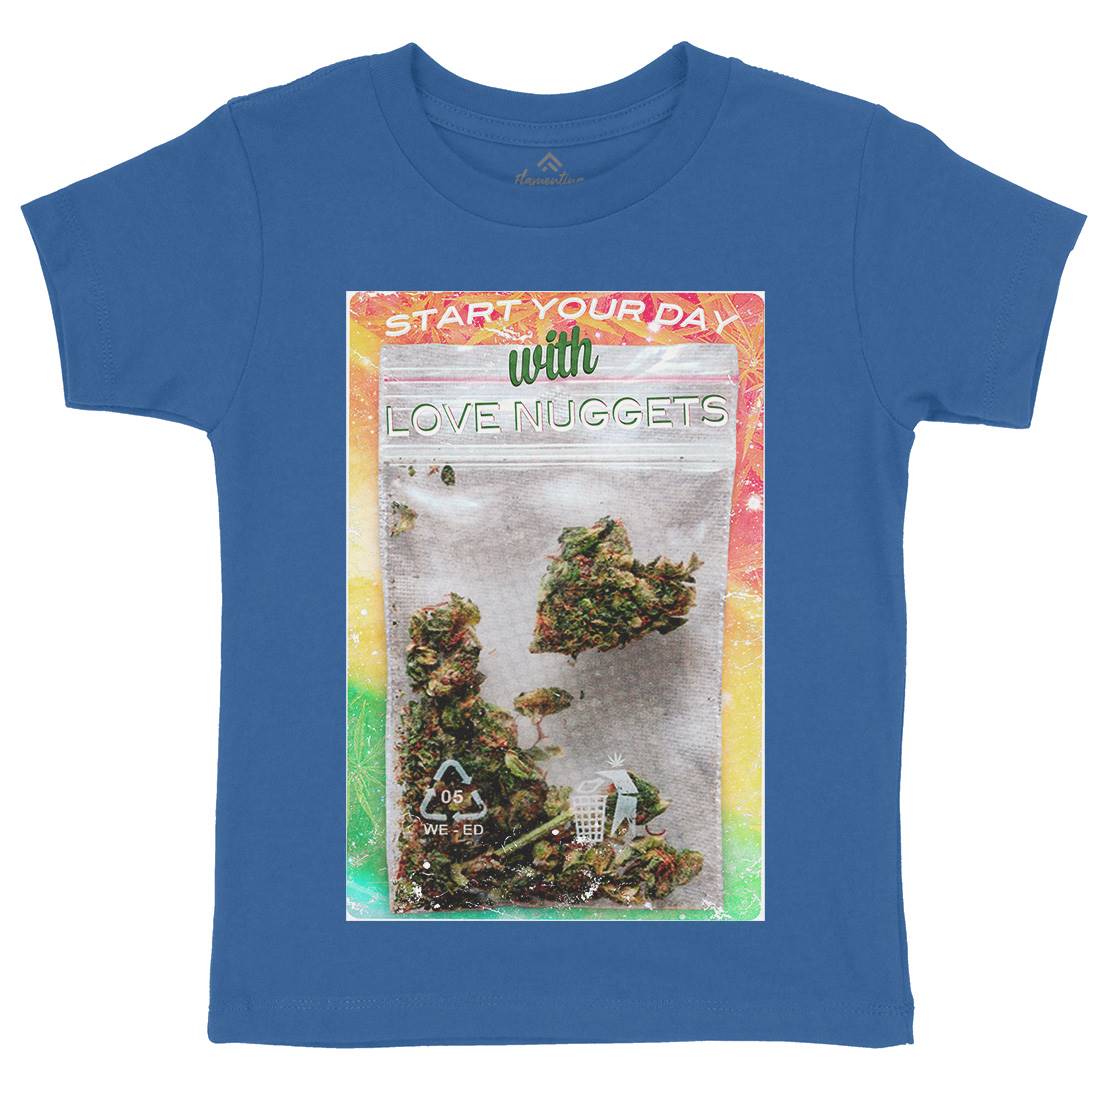 Love Nuggets Kids Crew Neck T-Shirt Drugs A871